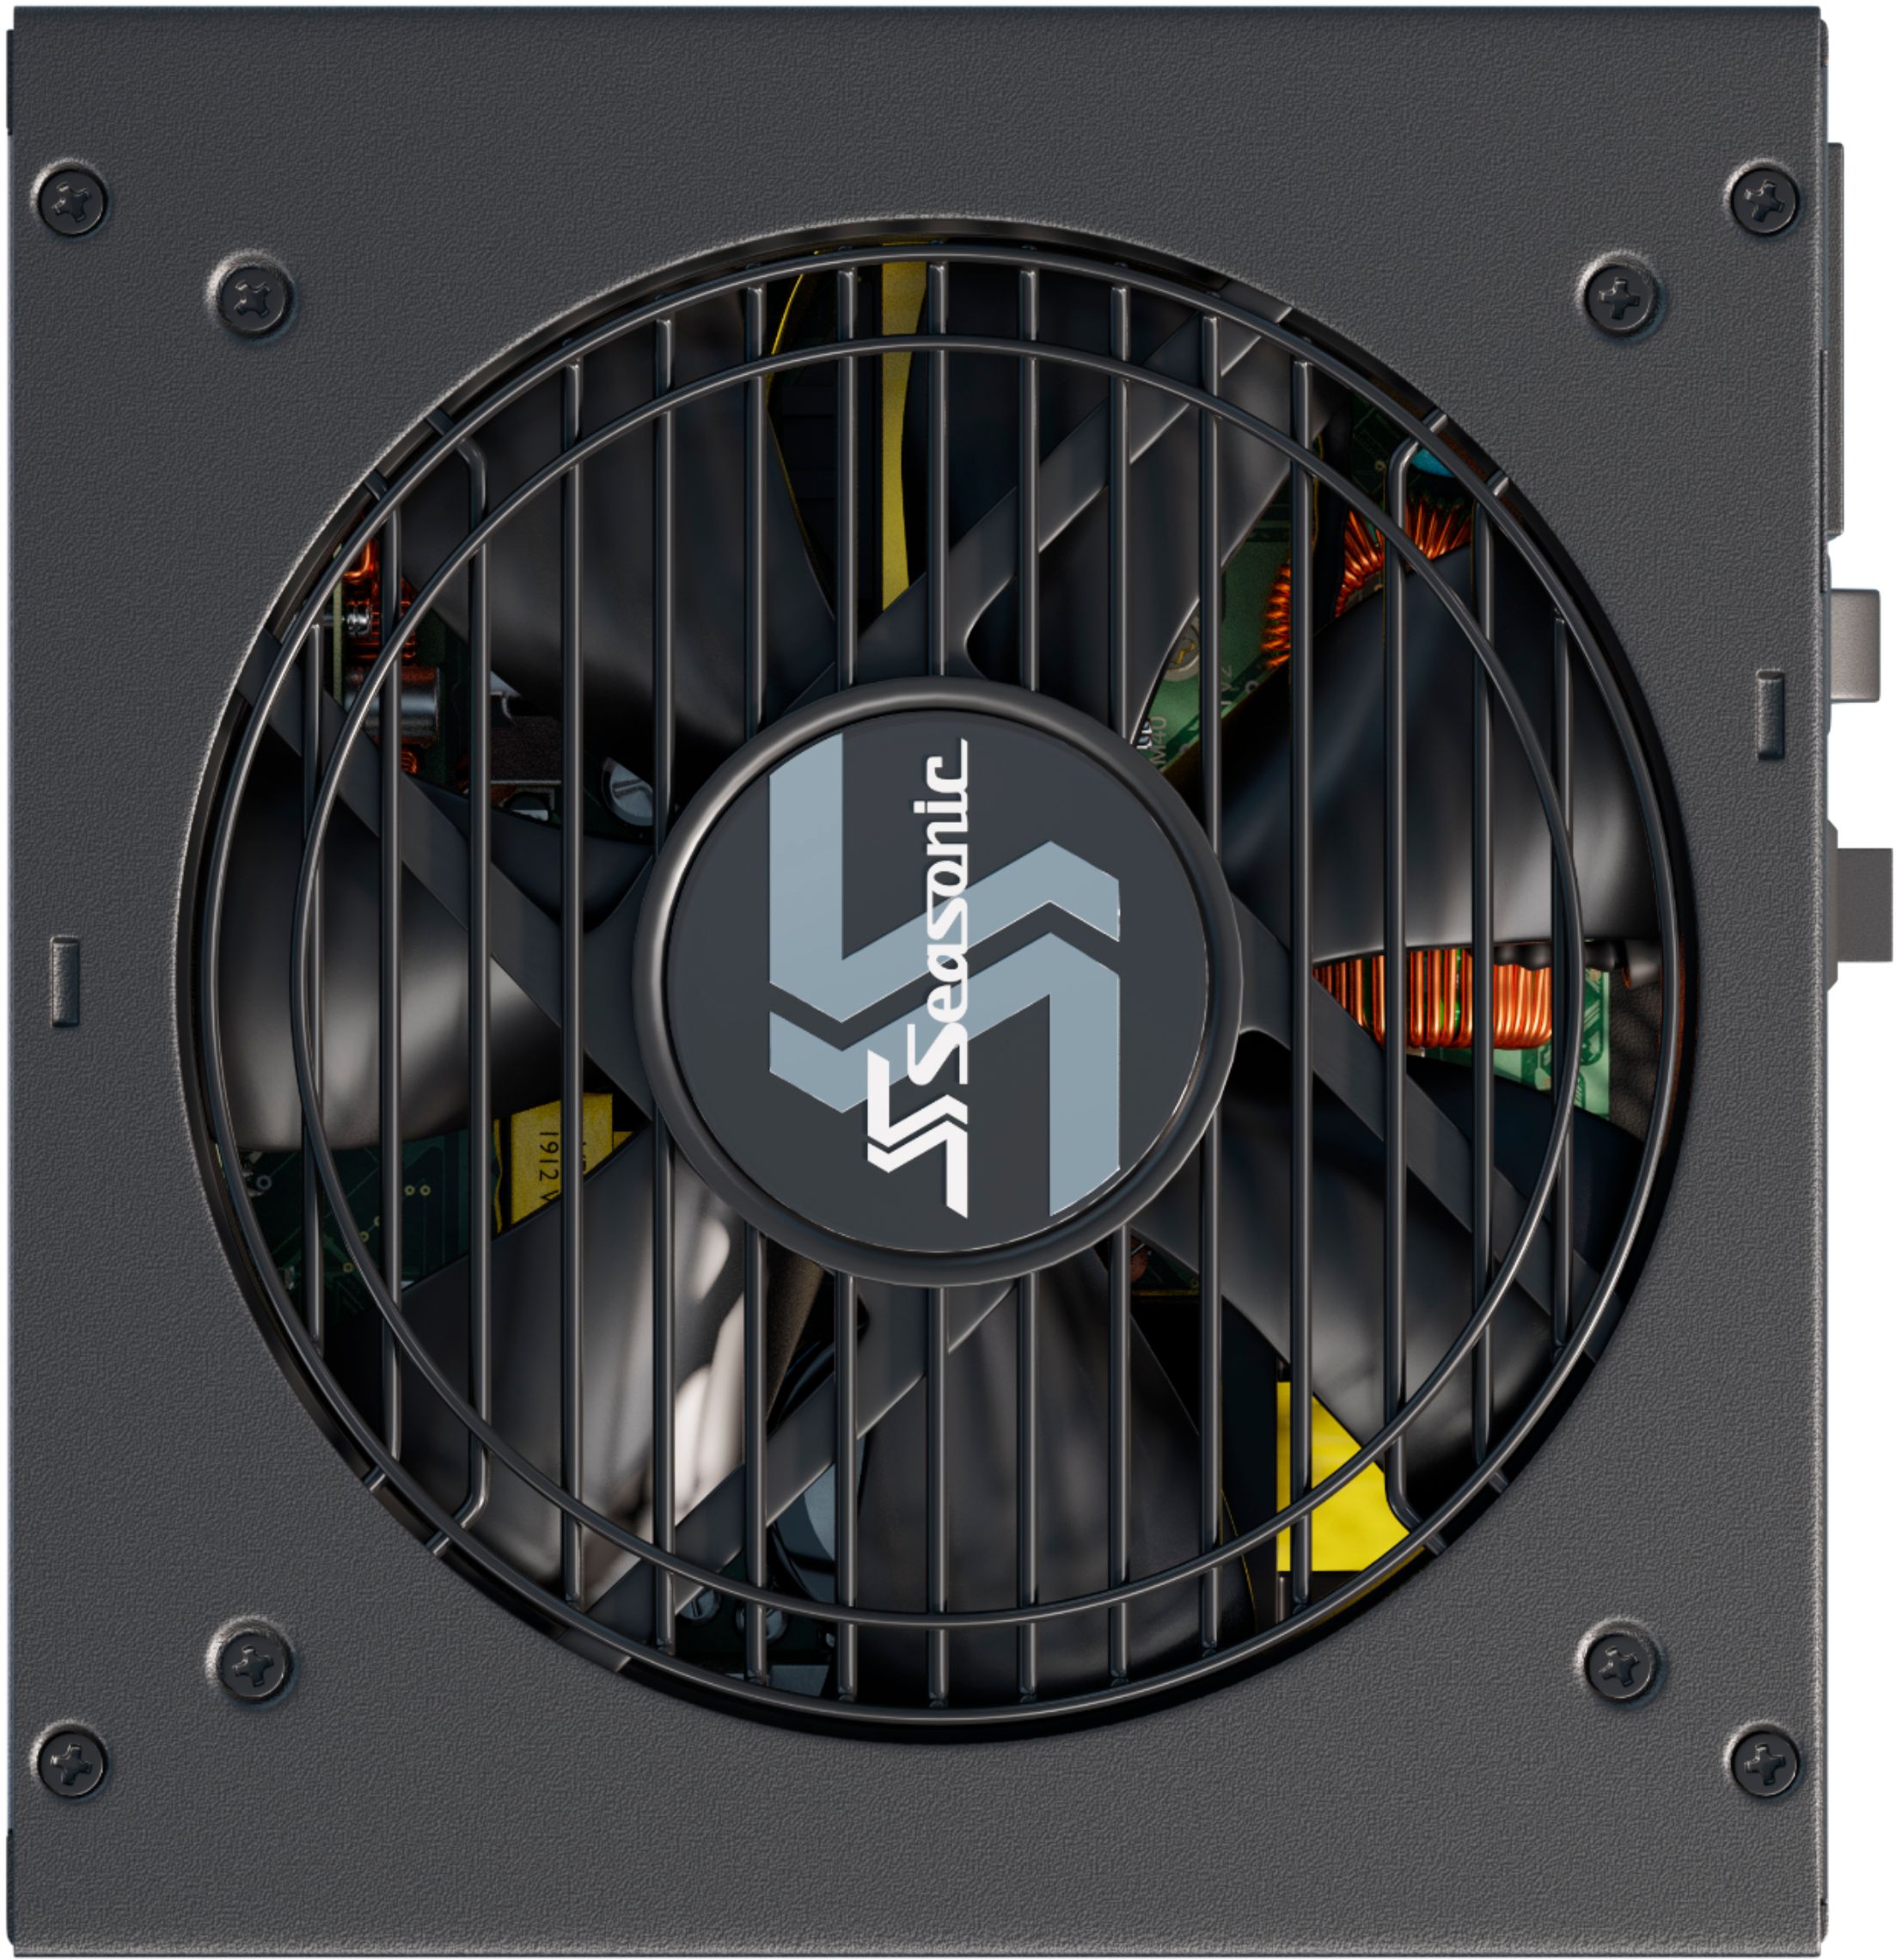 Seasonic FOCUS GX-1000, 1000W 80+ Gold, Full-Modular, Fan Control in  Fanless, Silent, and Cooling Mode, 10 Year Warranty, Perfect Power Supply  for